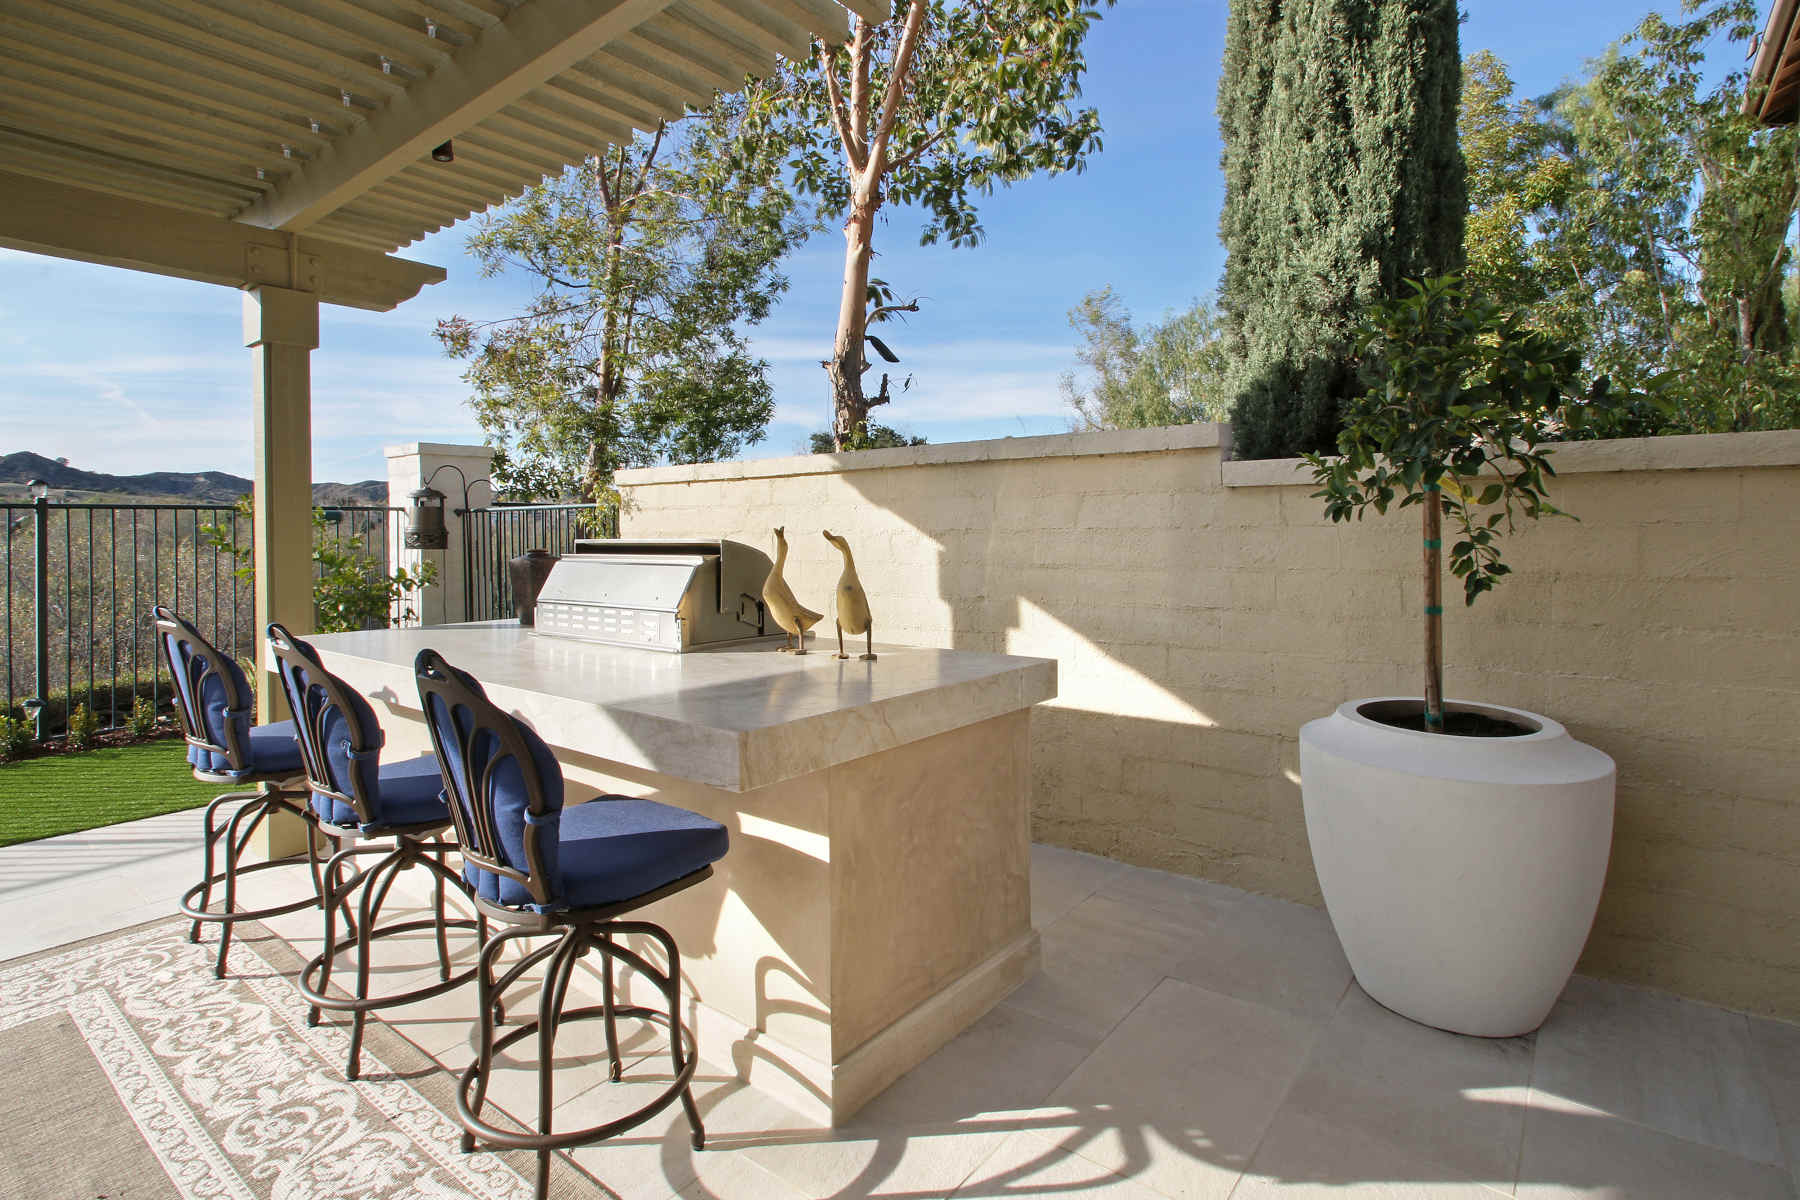 Custom barbeque with bar chairs, Dreamscape by MGR leading pool contractor in Orange County